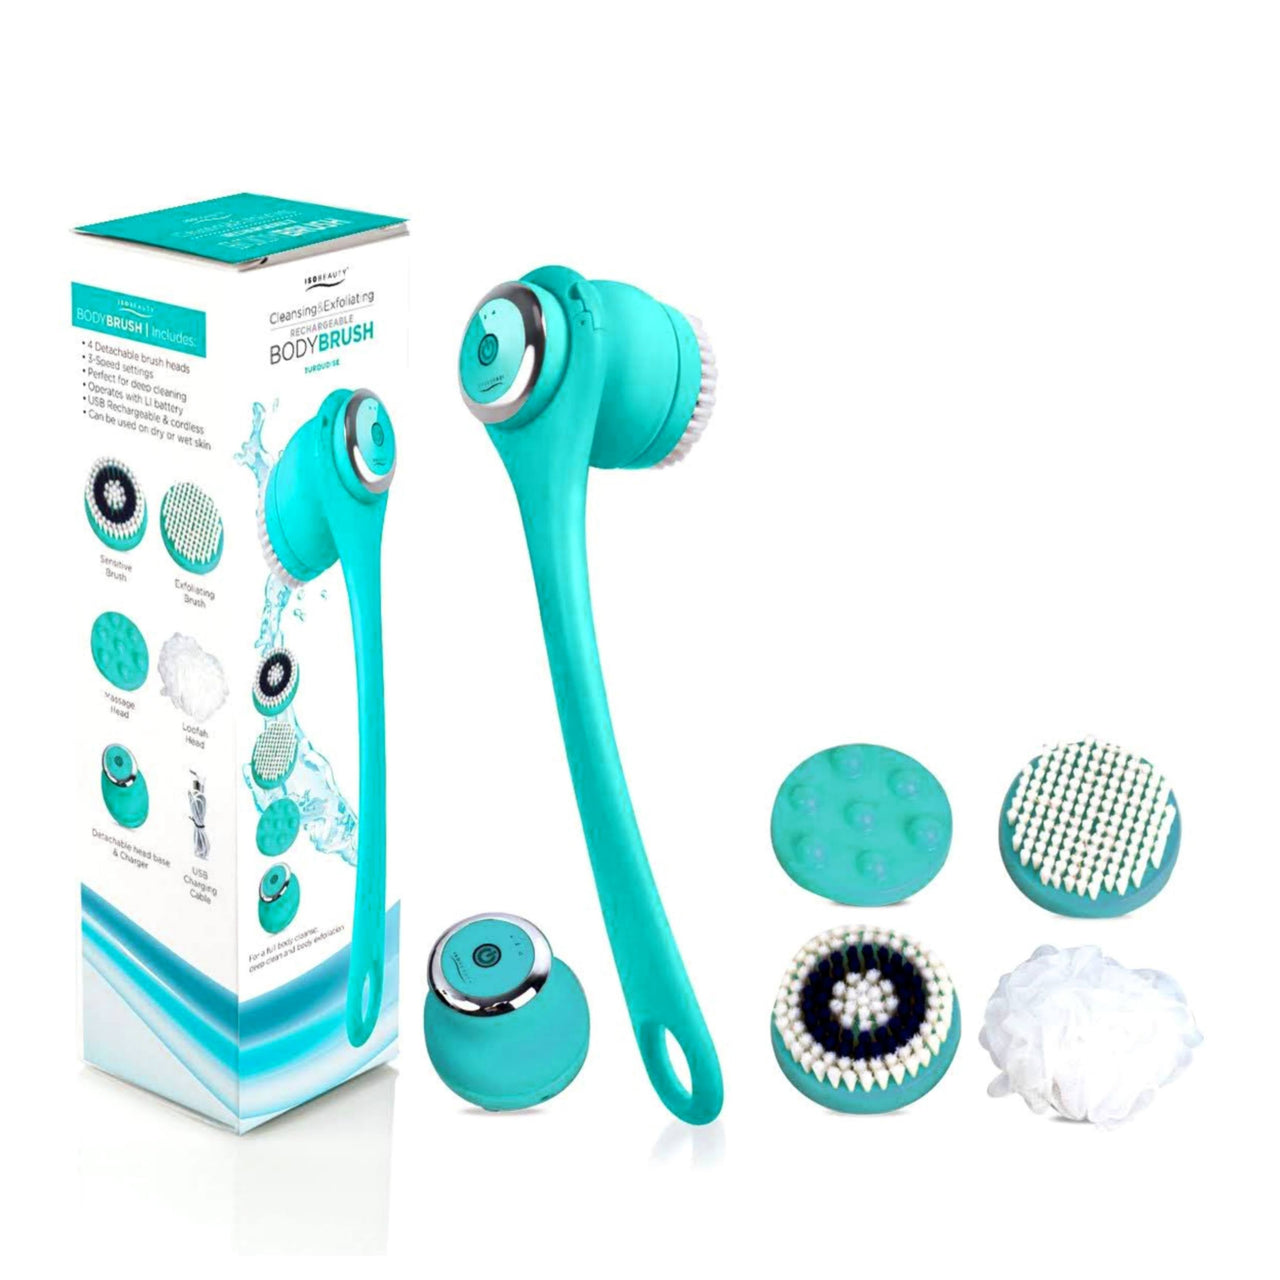 Wireless Waterproof Cleansing and Exfoliating Body Brush Set with 3 Speed 4 Brush Heads Turquoise